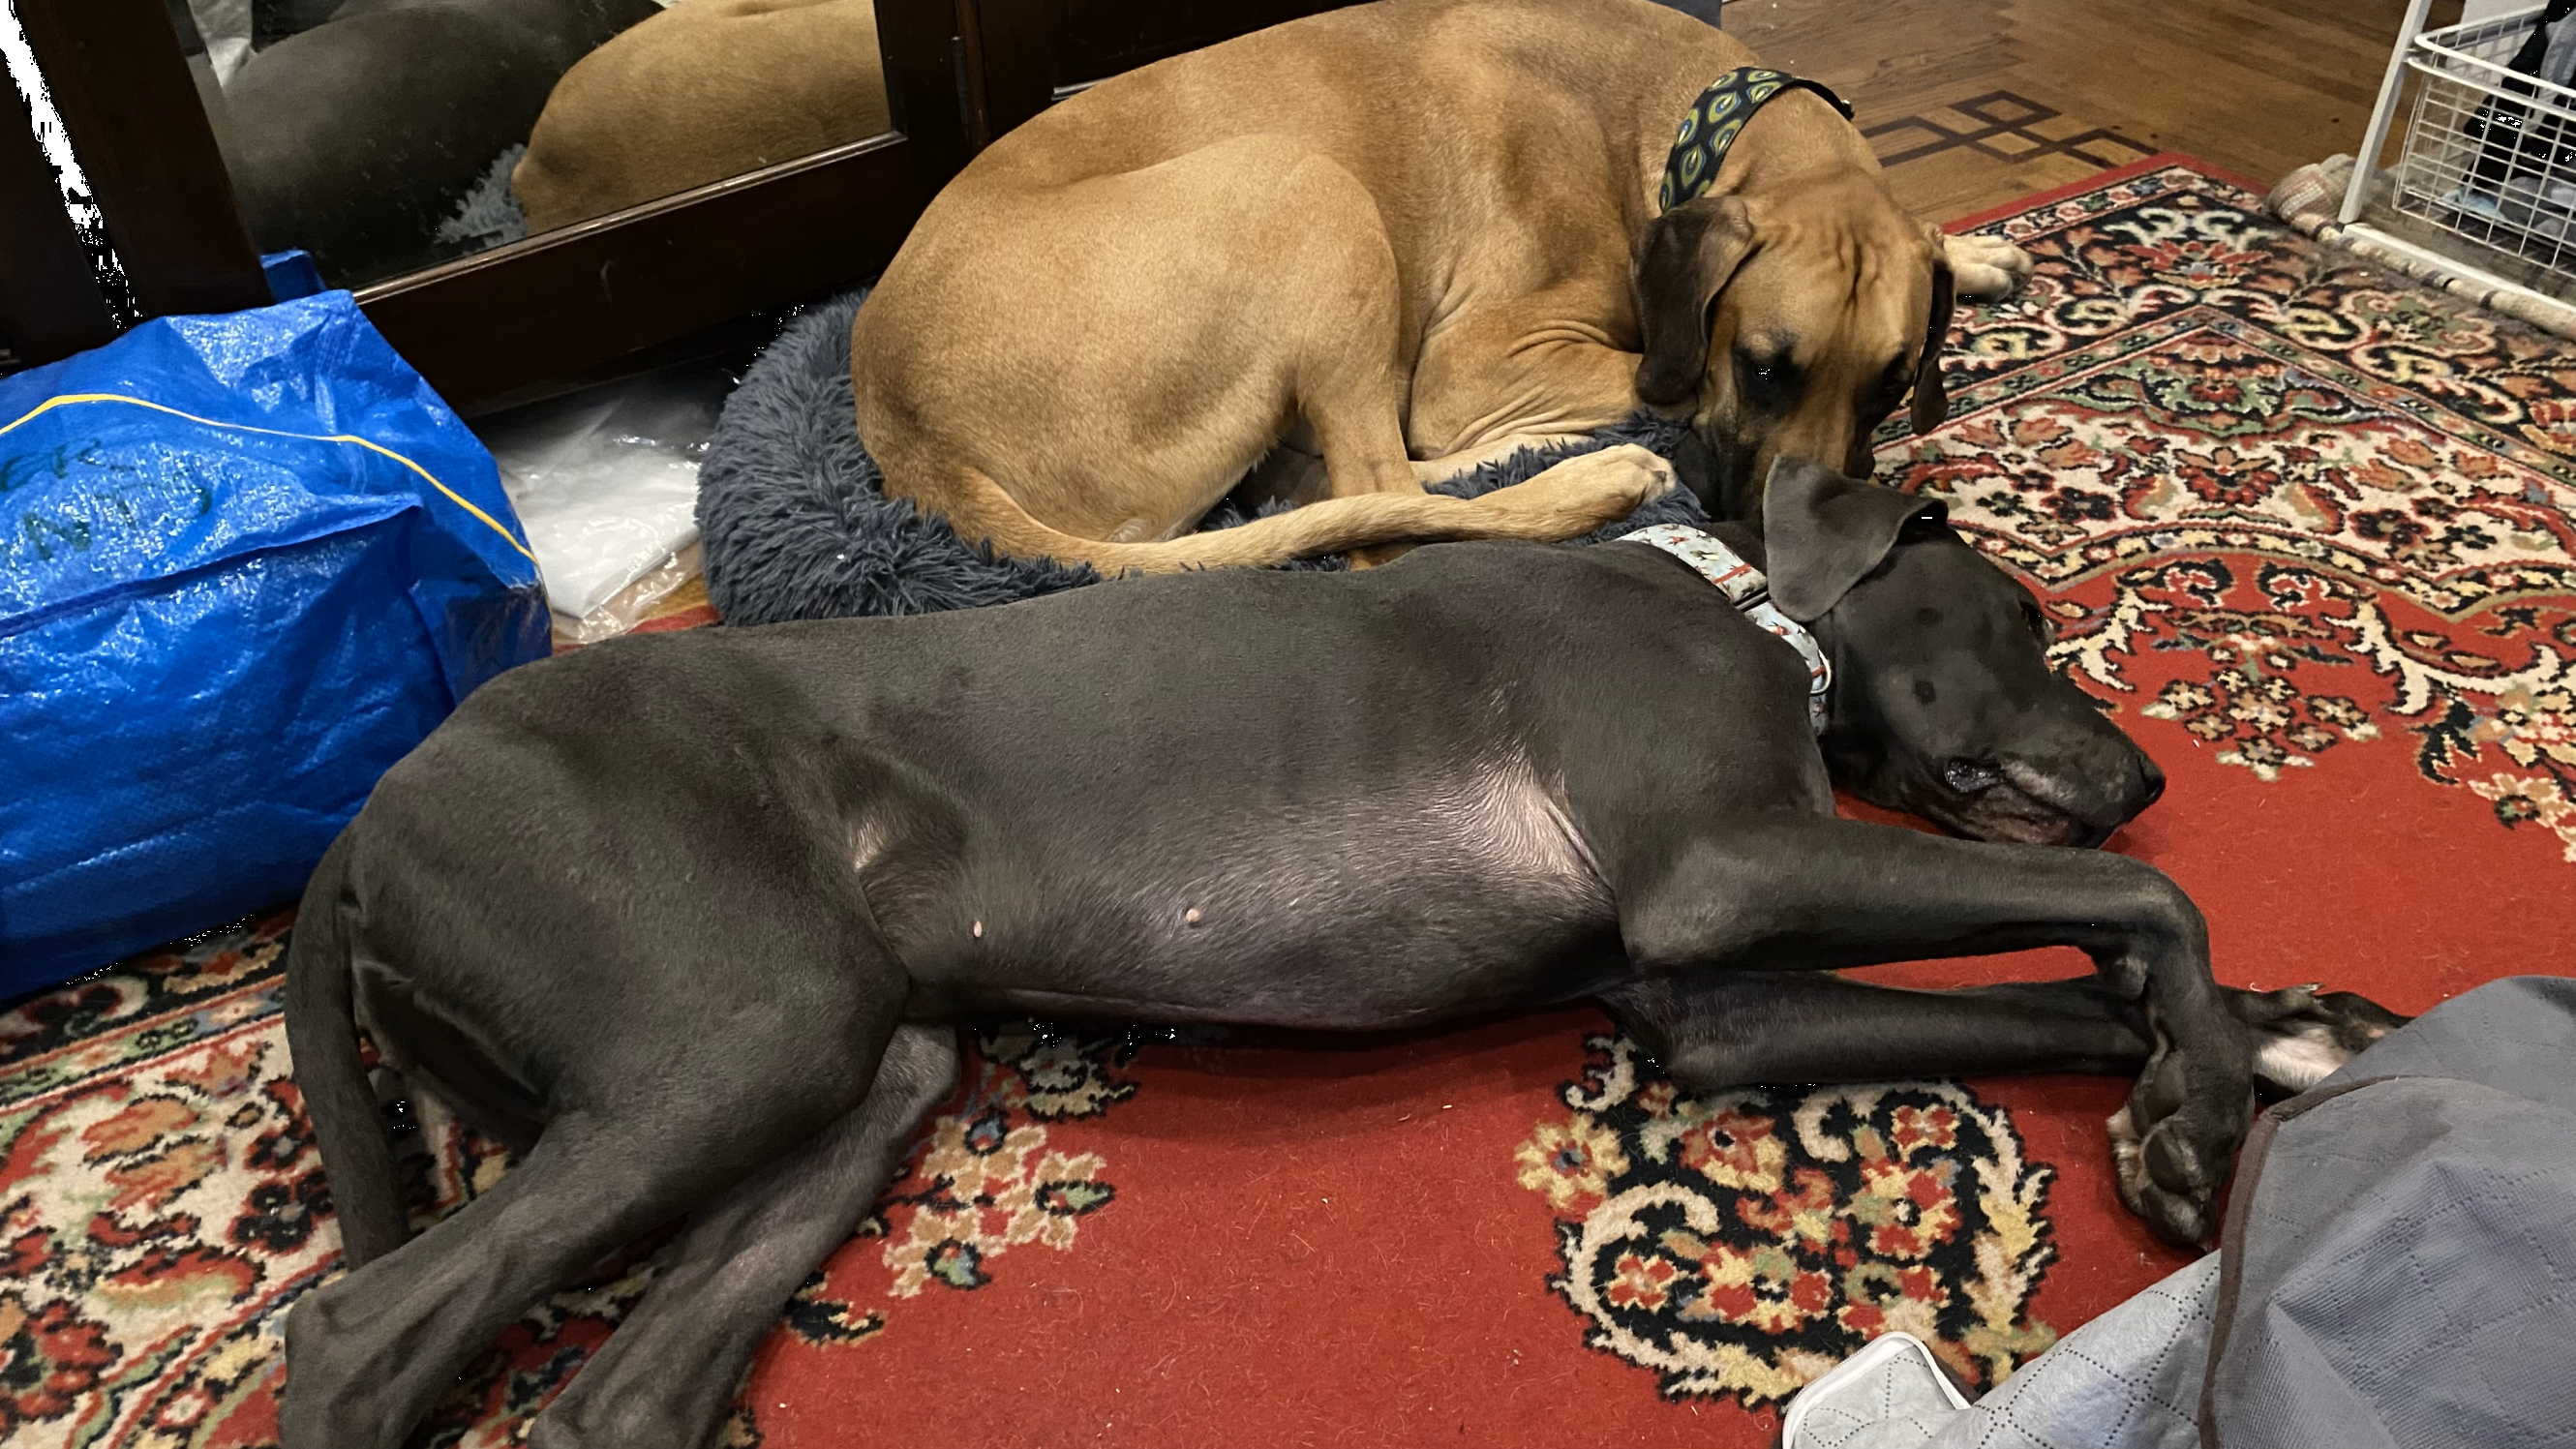 March 2nd, 2024 - Raya stretches out across the bottom, while Baldur squeezes himself on to the tiny dog bed.